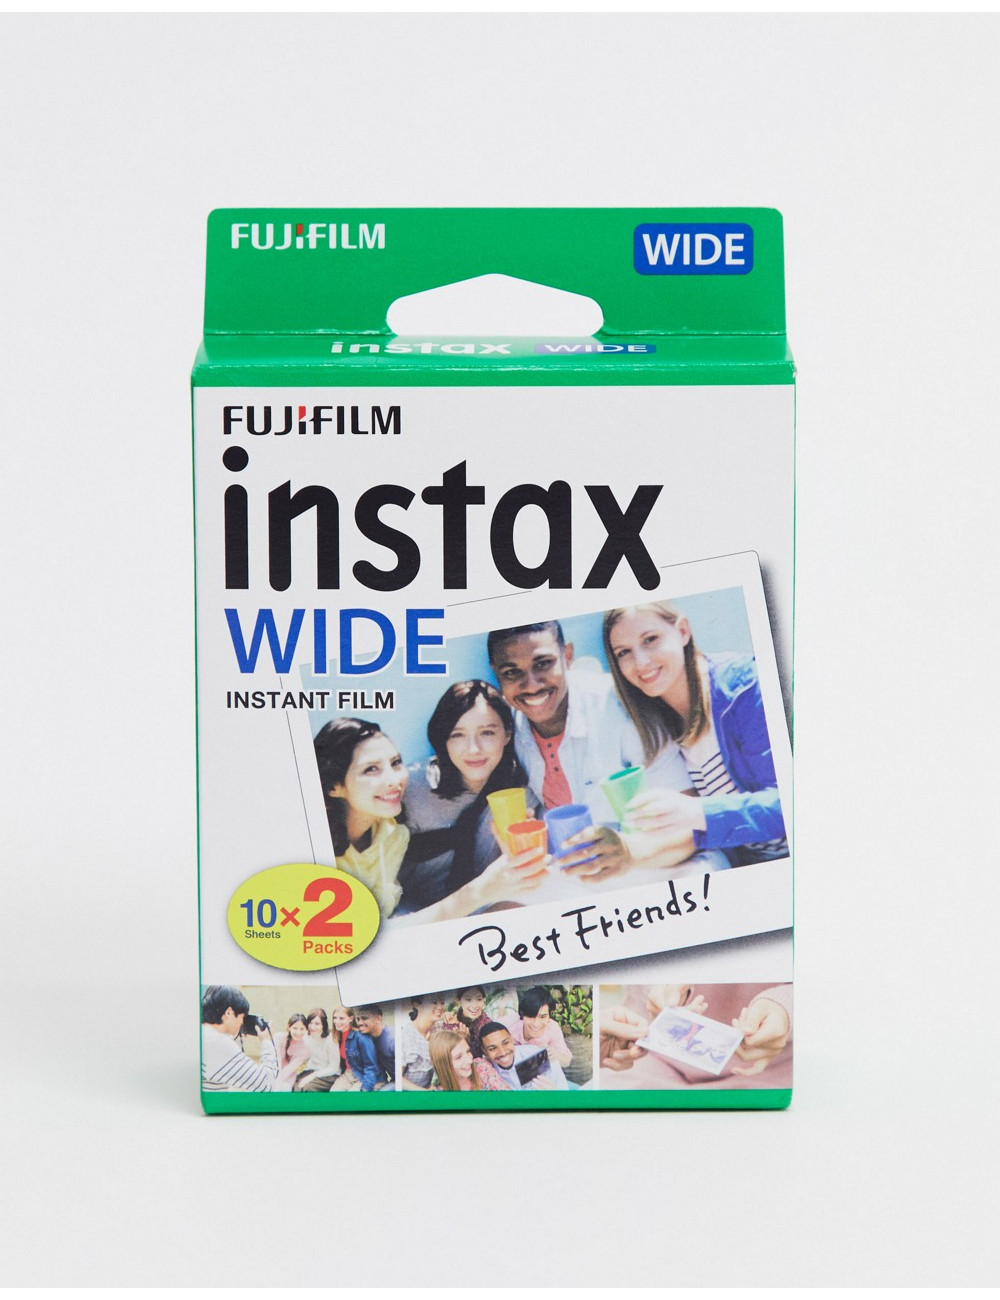 Instax Wide twin pack film...